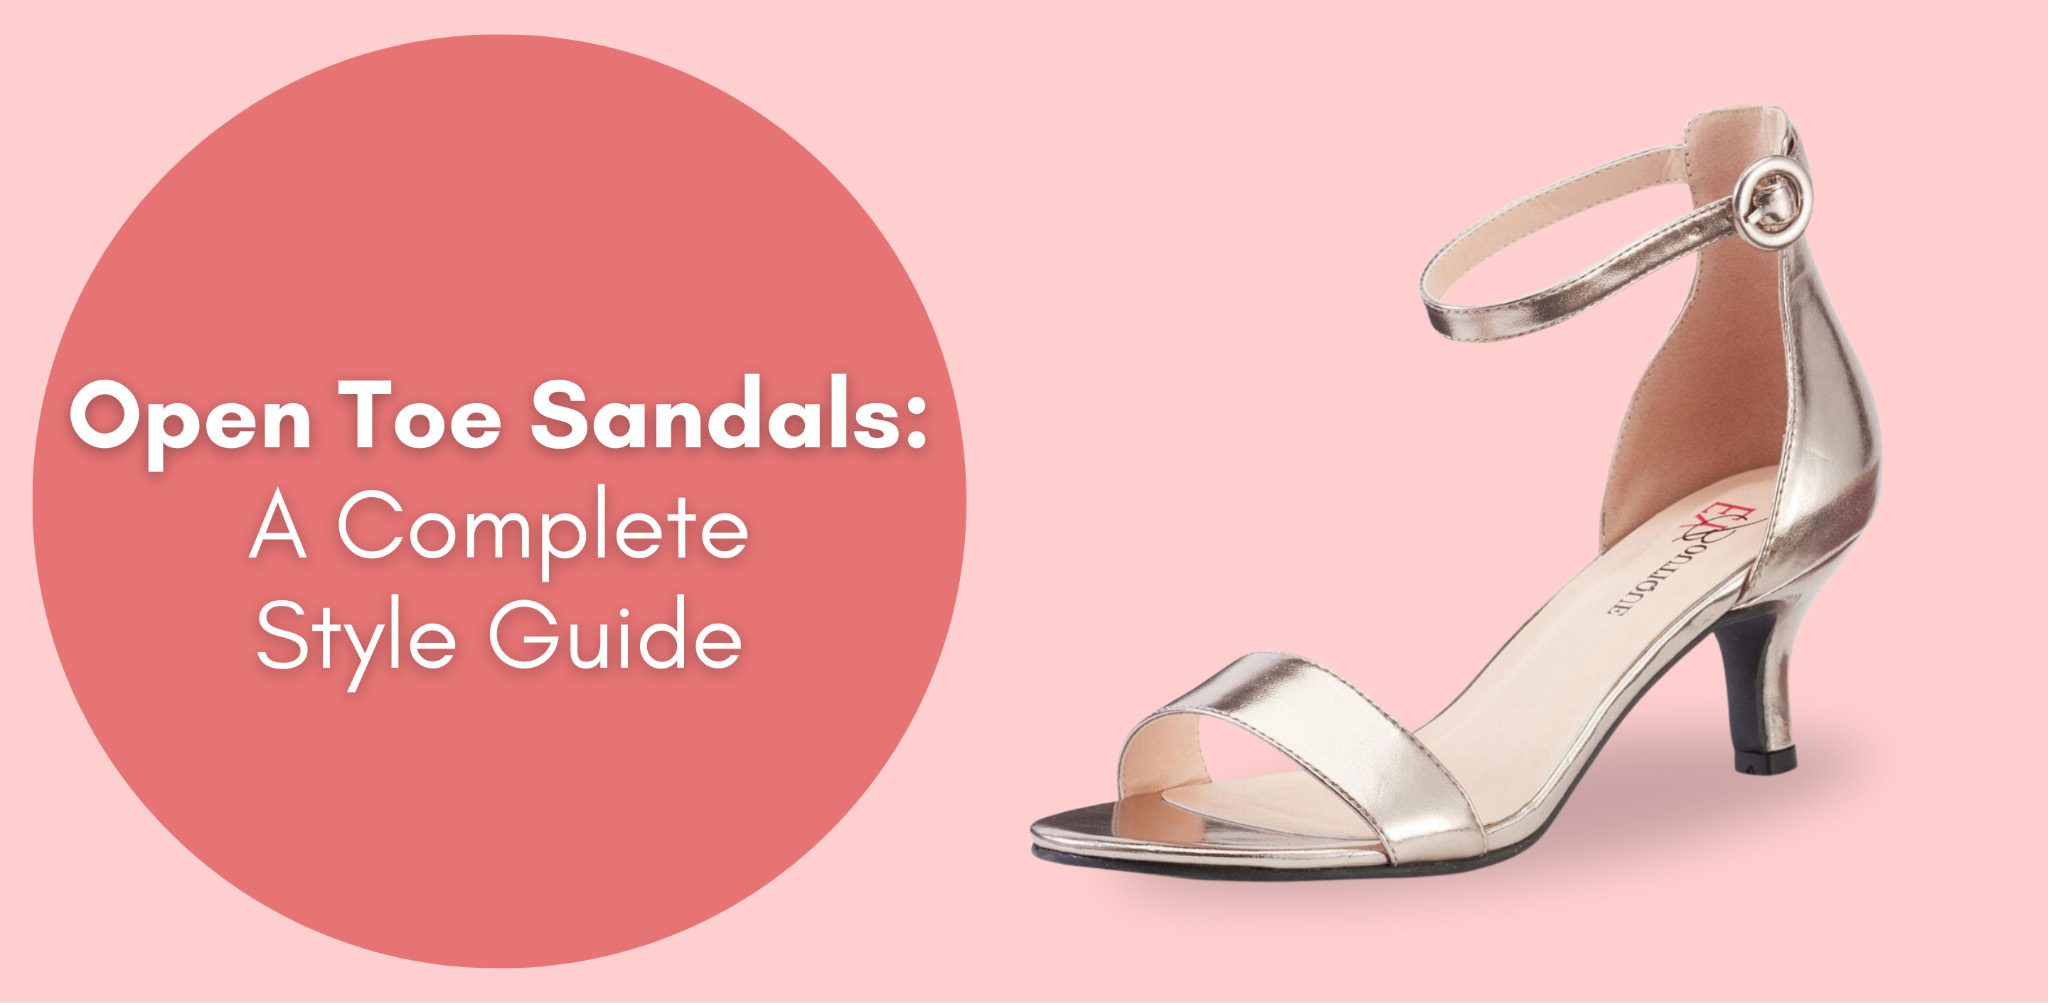 Open Toe Sandals: A Complete Style Guide